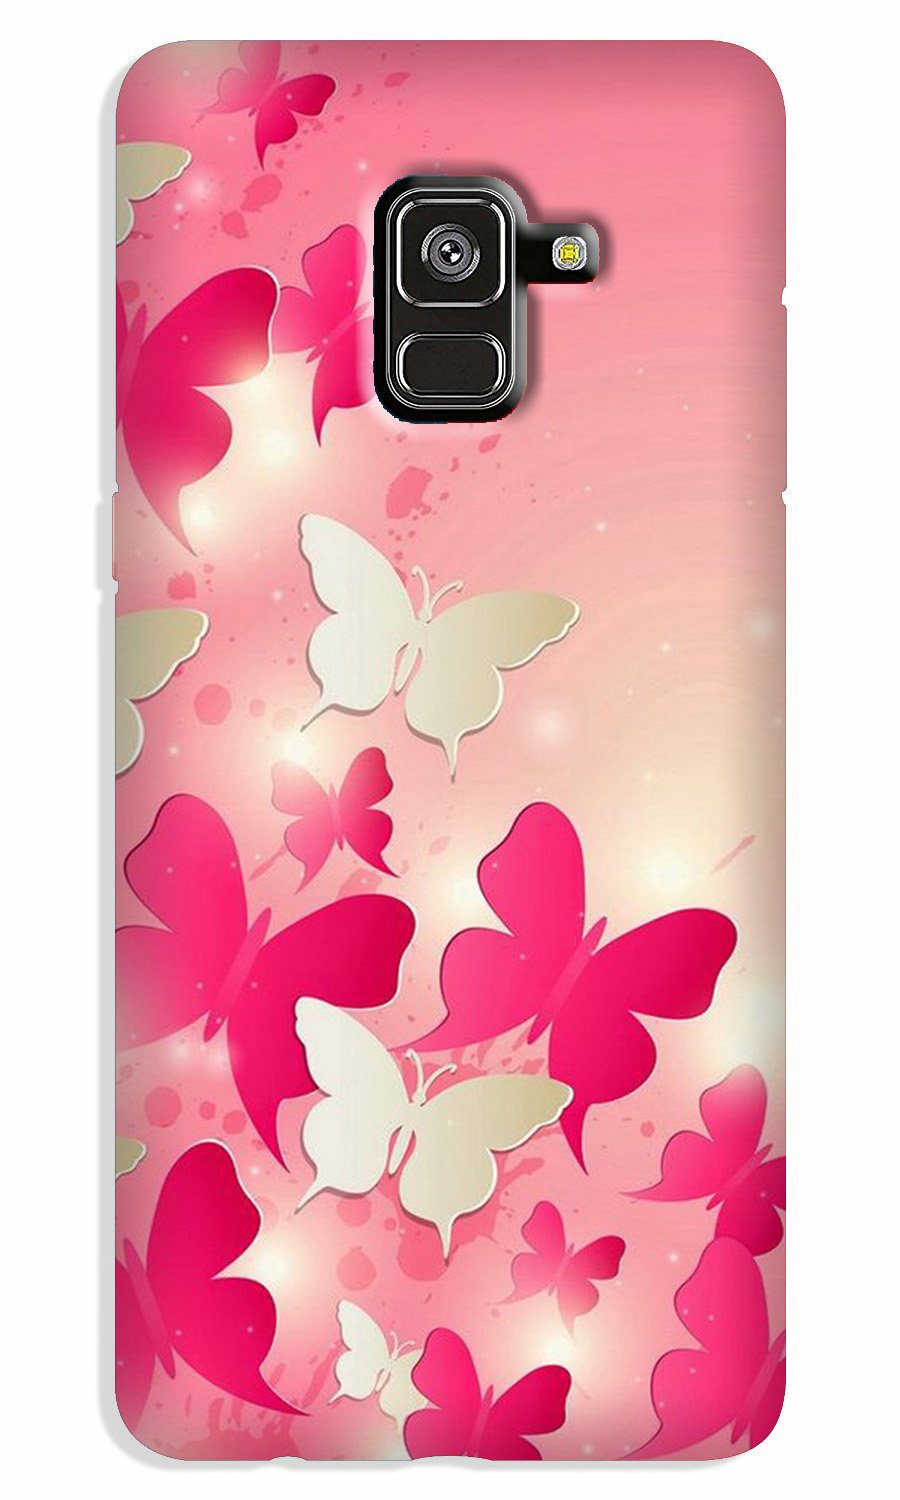 White Pick Butterflies Case for Galaxy J6 / On6